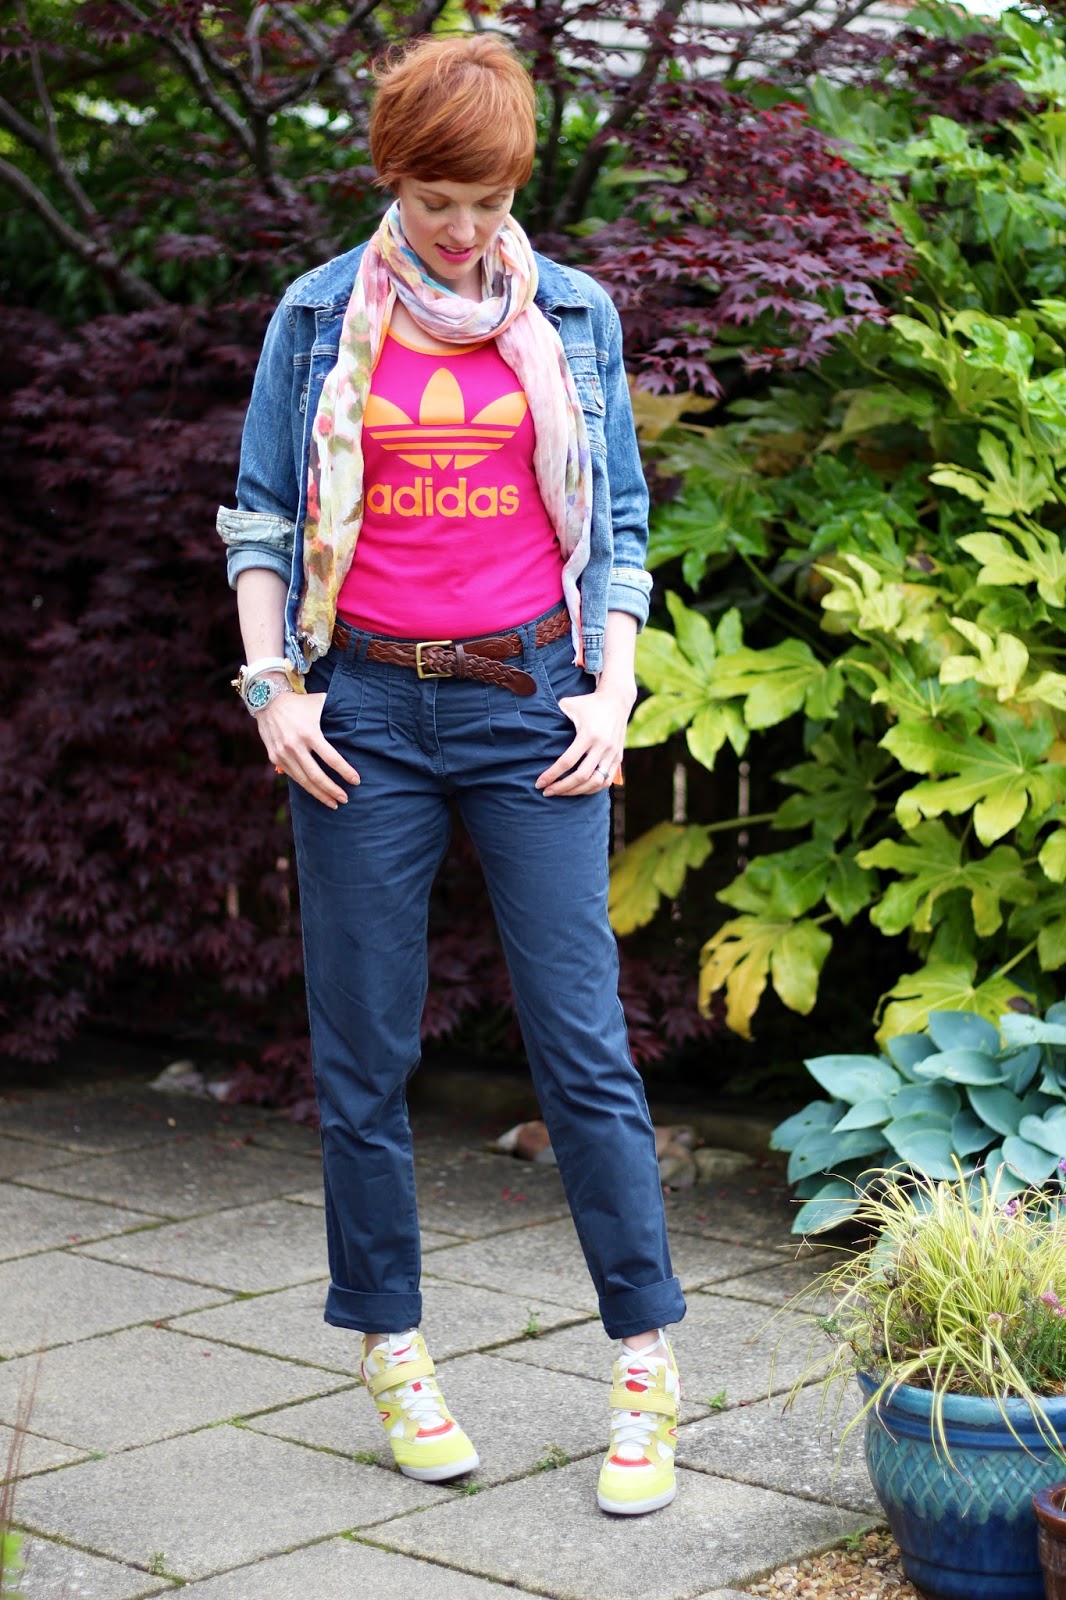 Fake Fabulous | Sports chic. Adidas vest top, Denim Jacket, navy chinos, stiletto trainers, pink and orange 